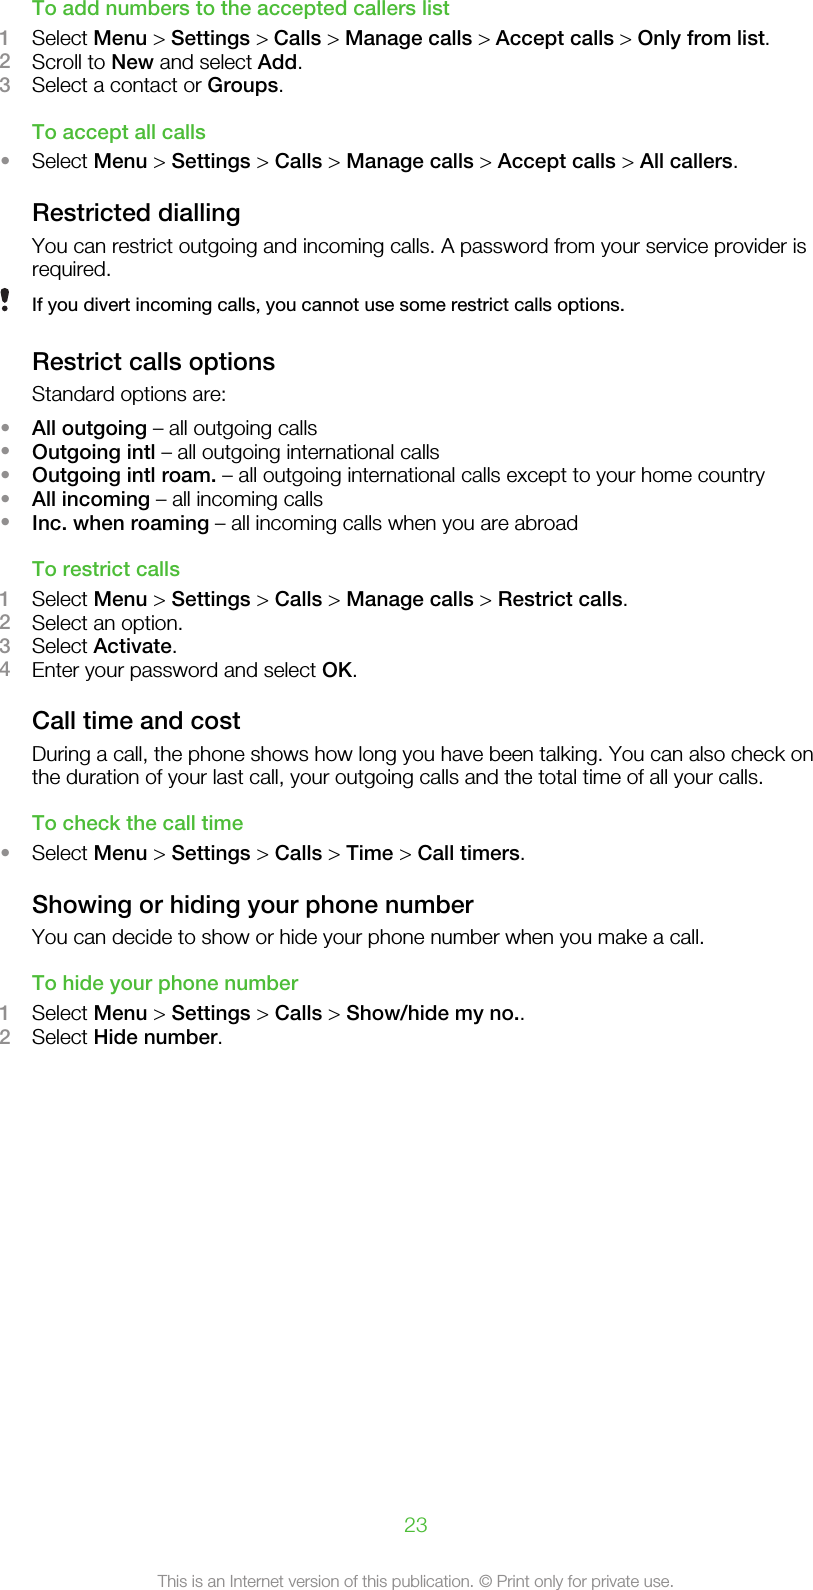 To add numbers to the accepted callers list1Select Menu &gt; Settings &gt; Calls &gt; Manage calls &gt; Accept calls &gt; Only from list.2Scroll to New and select Add.3Select a contact or Groups.To accept all calls•Select Menu &gt; Settings &gt; Calls &gt; Manage calls &gt; Accept calls &gt; All callers.Restricted diallingYou can restrict outgoing and incoming calls. A password from your service provider isrequired.If you divert incoming calls, you cannot use some restrict calls options.Restrict calls optionsStandard options are:•All outgoing – all outgoing calls•Outgoing intl – all outgoing international calls•Outgoing intl roam. – all outgoing international calls except to your home country•All incoming – all incoming calls•Inc. when roaming – all incoming calls when you are abroadTo restrict calls1Select Menu &gt; Settings &gt; Calls &gt; Manage calls &gt; Restrict calls.2Select an option.3Select Activate.4Enter your password and select OK.Call time and costDuring a call, the phone shows how long you have been talking. You can also check onthe duration of your last call, your outgoing calls and the total time of all your calls.To check the call time•Select Menu &gt; Settings &gt; Calls &gt; Time &gt; Call timers.Showing or hiding your phone numberYou can decide to show or hide your phone number when you make a call.To hide your phone number1Select Menu &gt; Settings &gt; Calls &gt; Show/hide my no..2Select Hide number.23This is an Internet version of this publication. © Print only for private use.